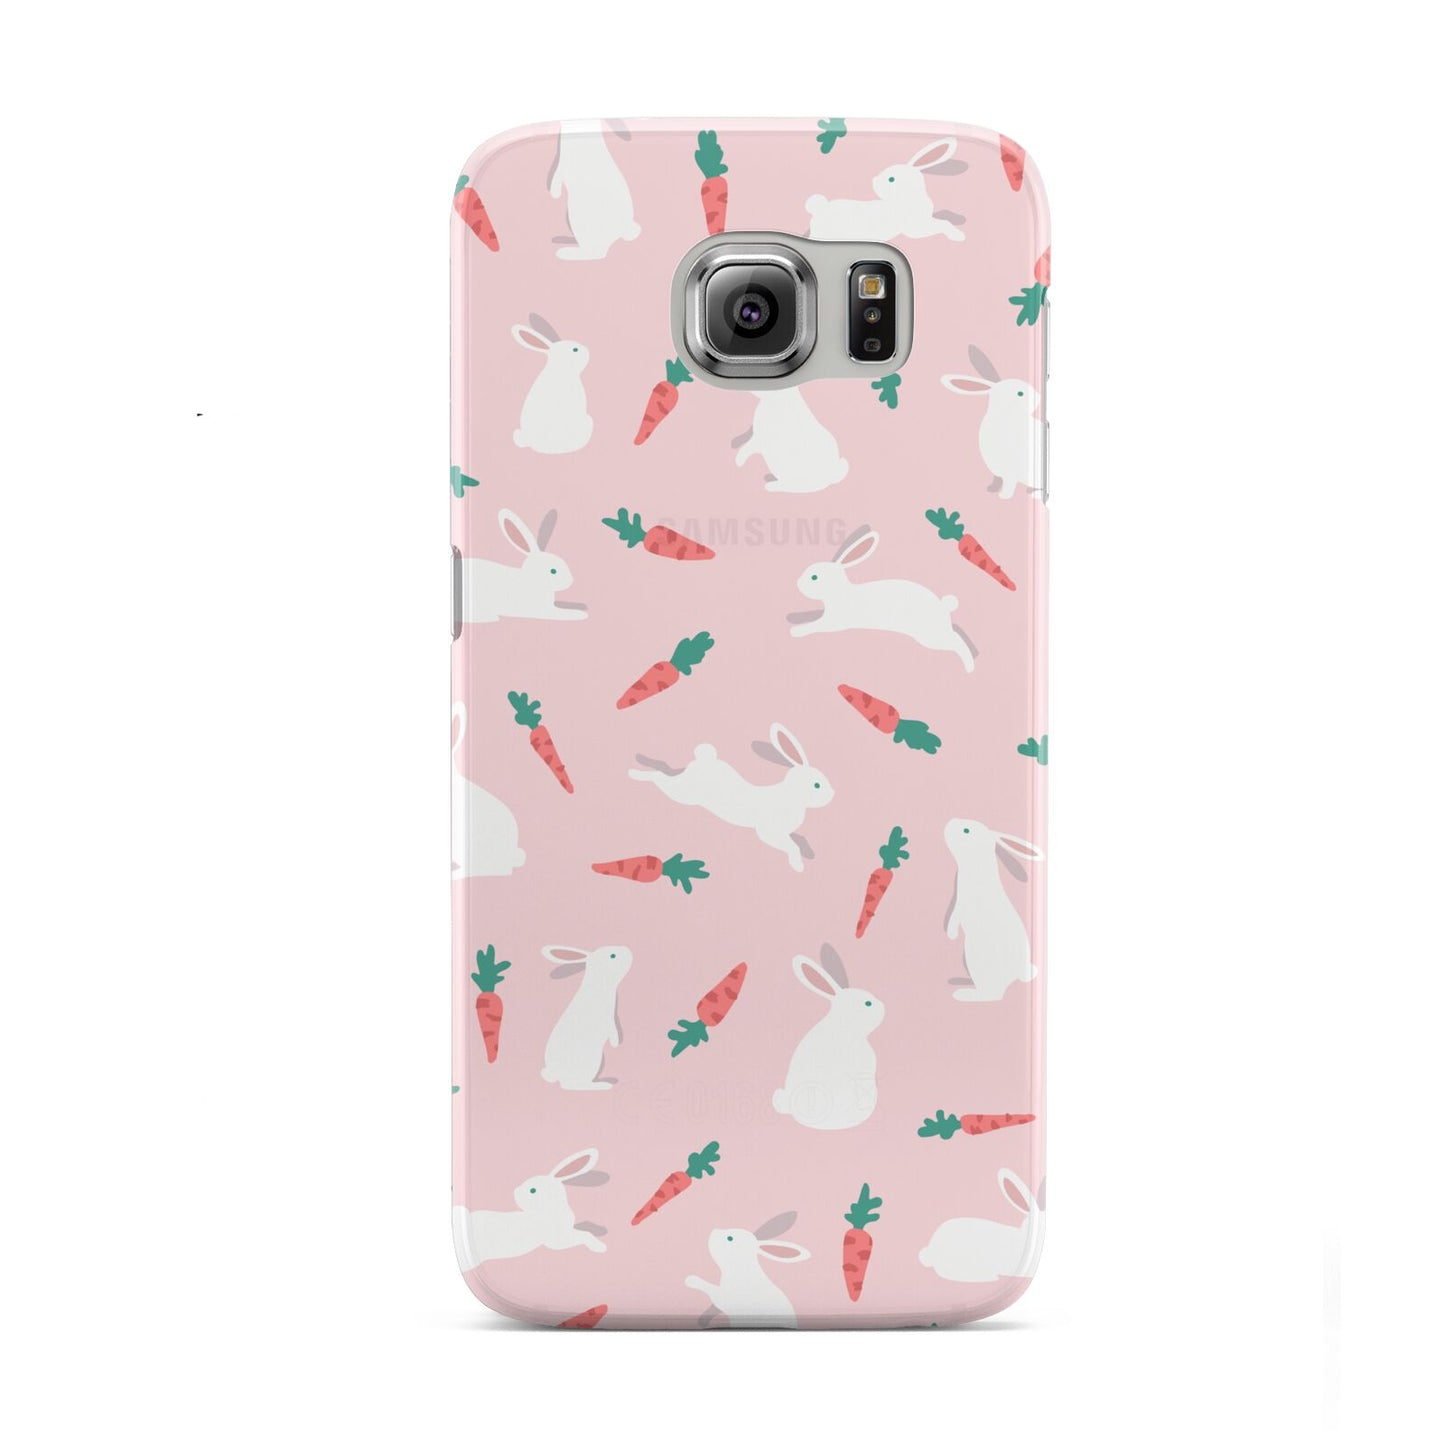 Easter Bunny And Carrot Samsung Galaxy S6 Case